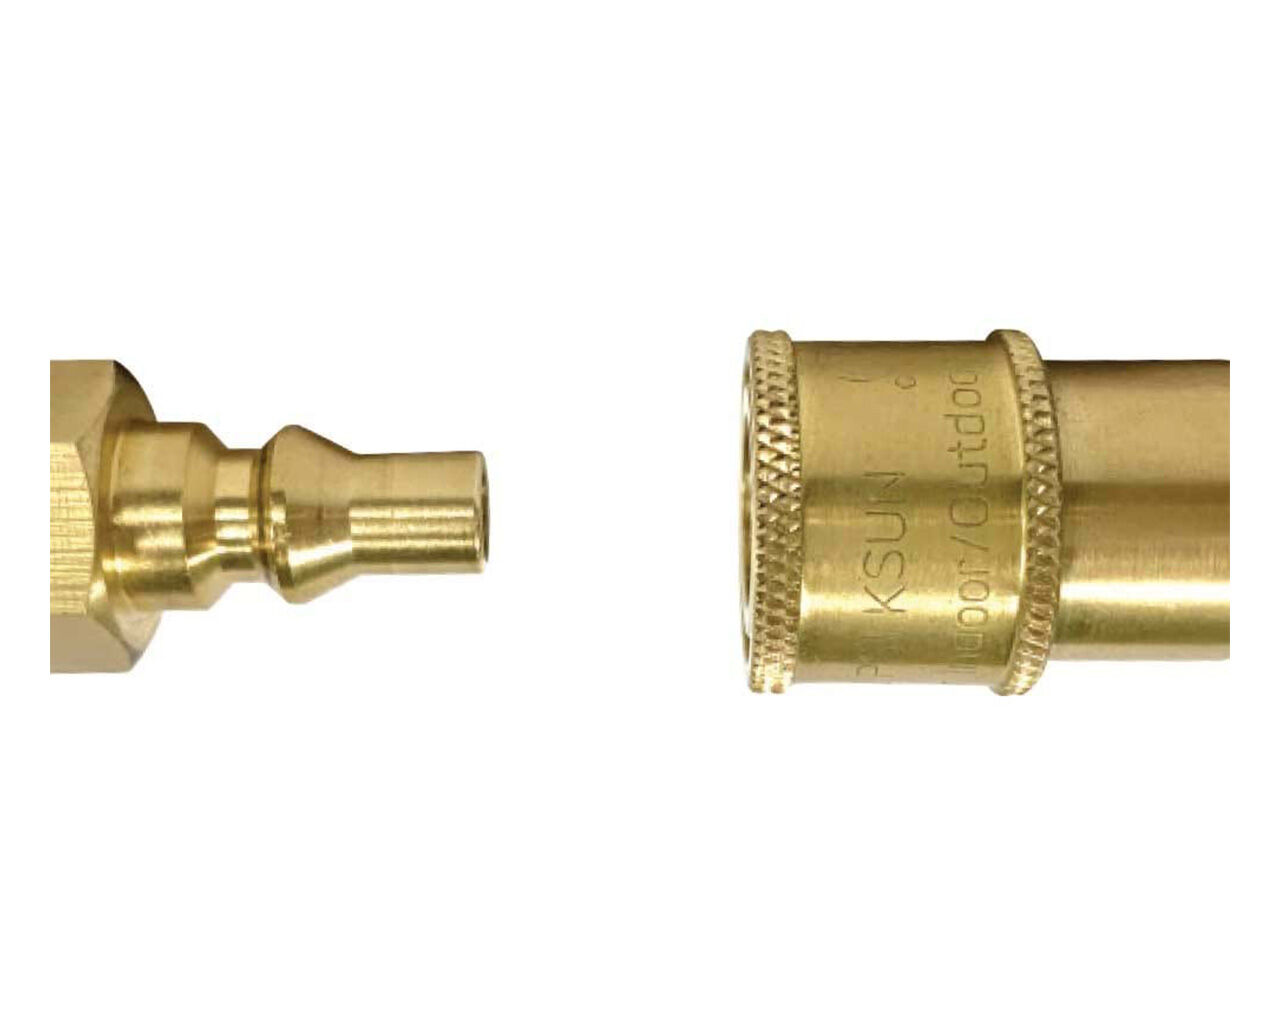 Gasmate 3/8 SAE Quick Connect Fitting